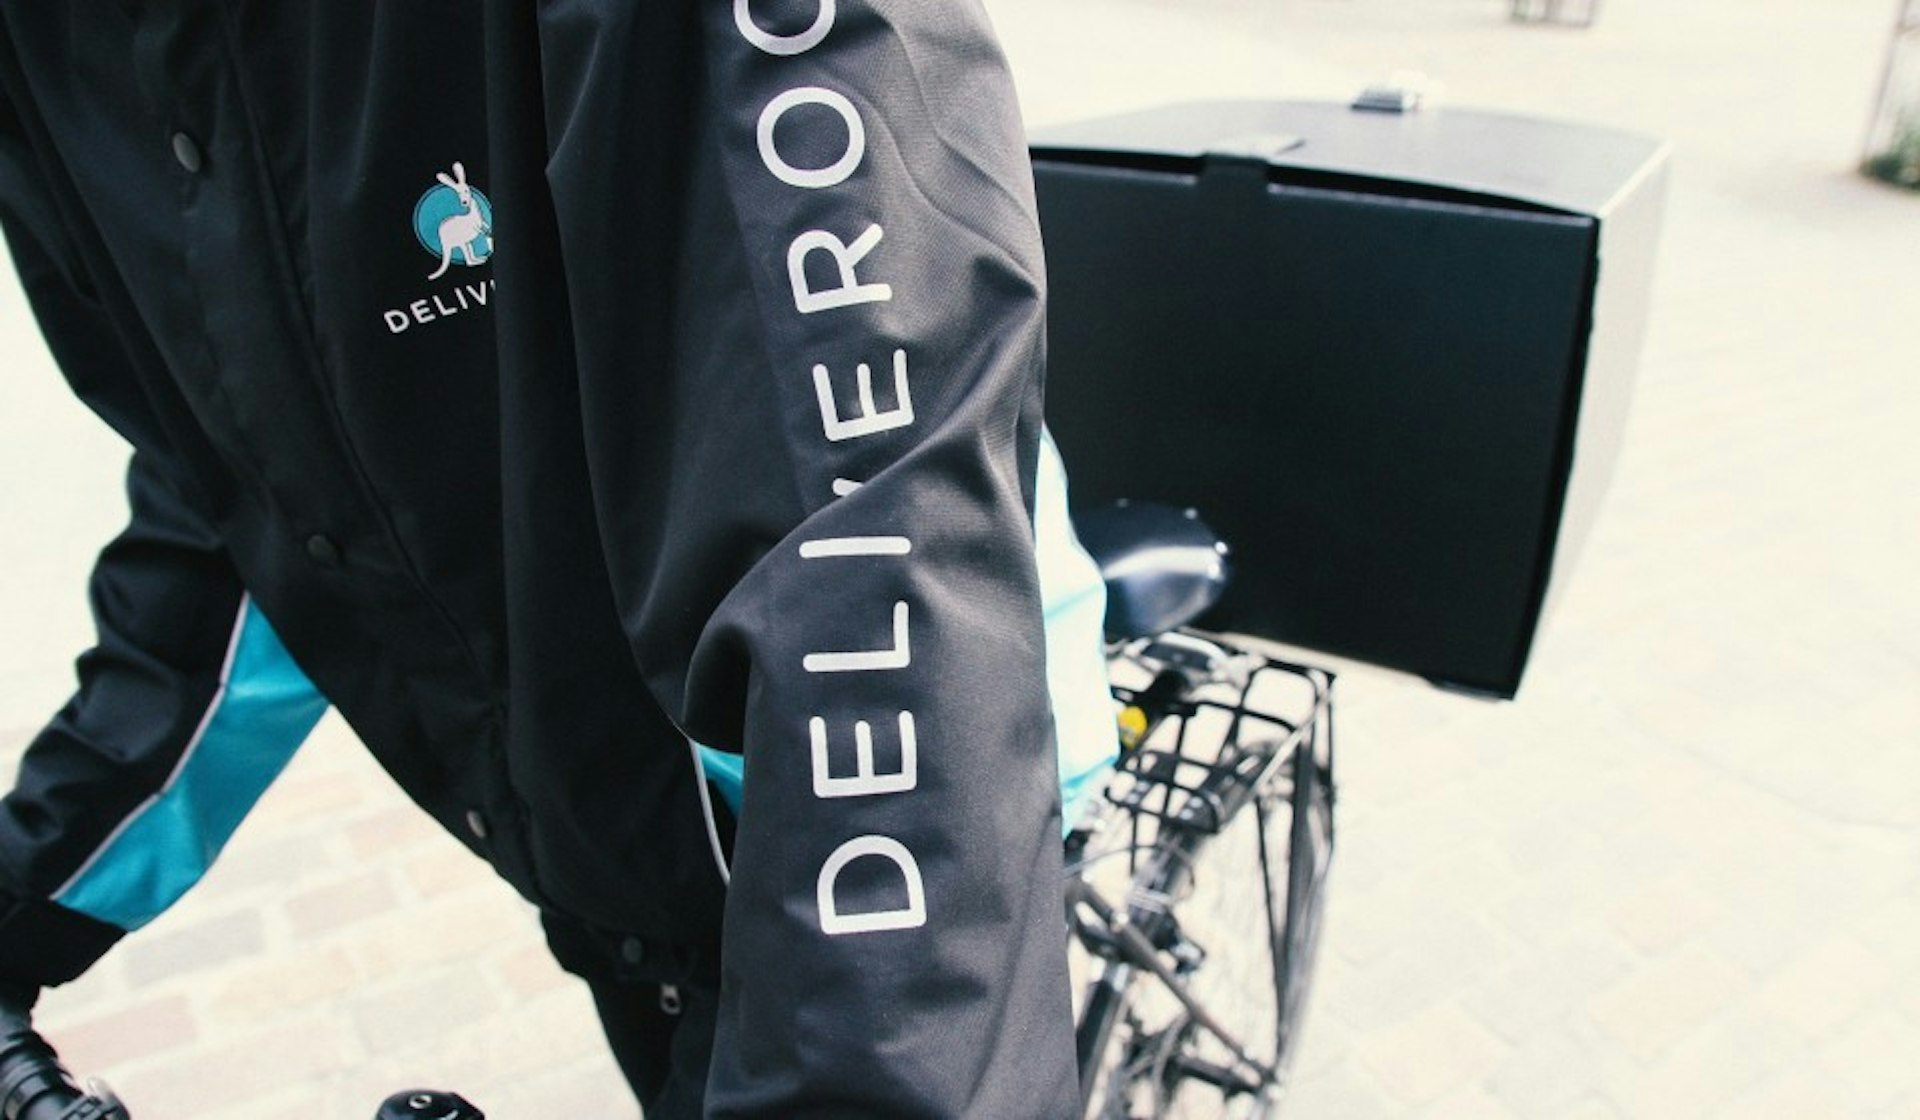 Fighting Deliveroo: how to resist in the gig economy